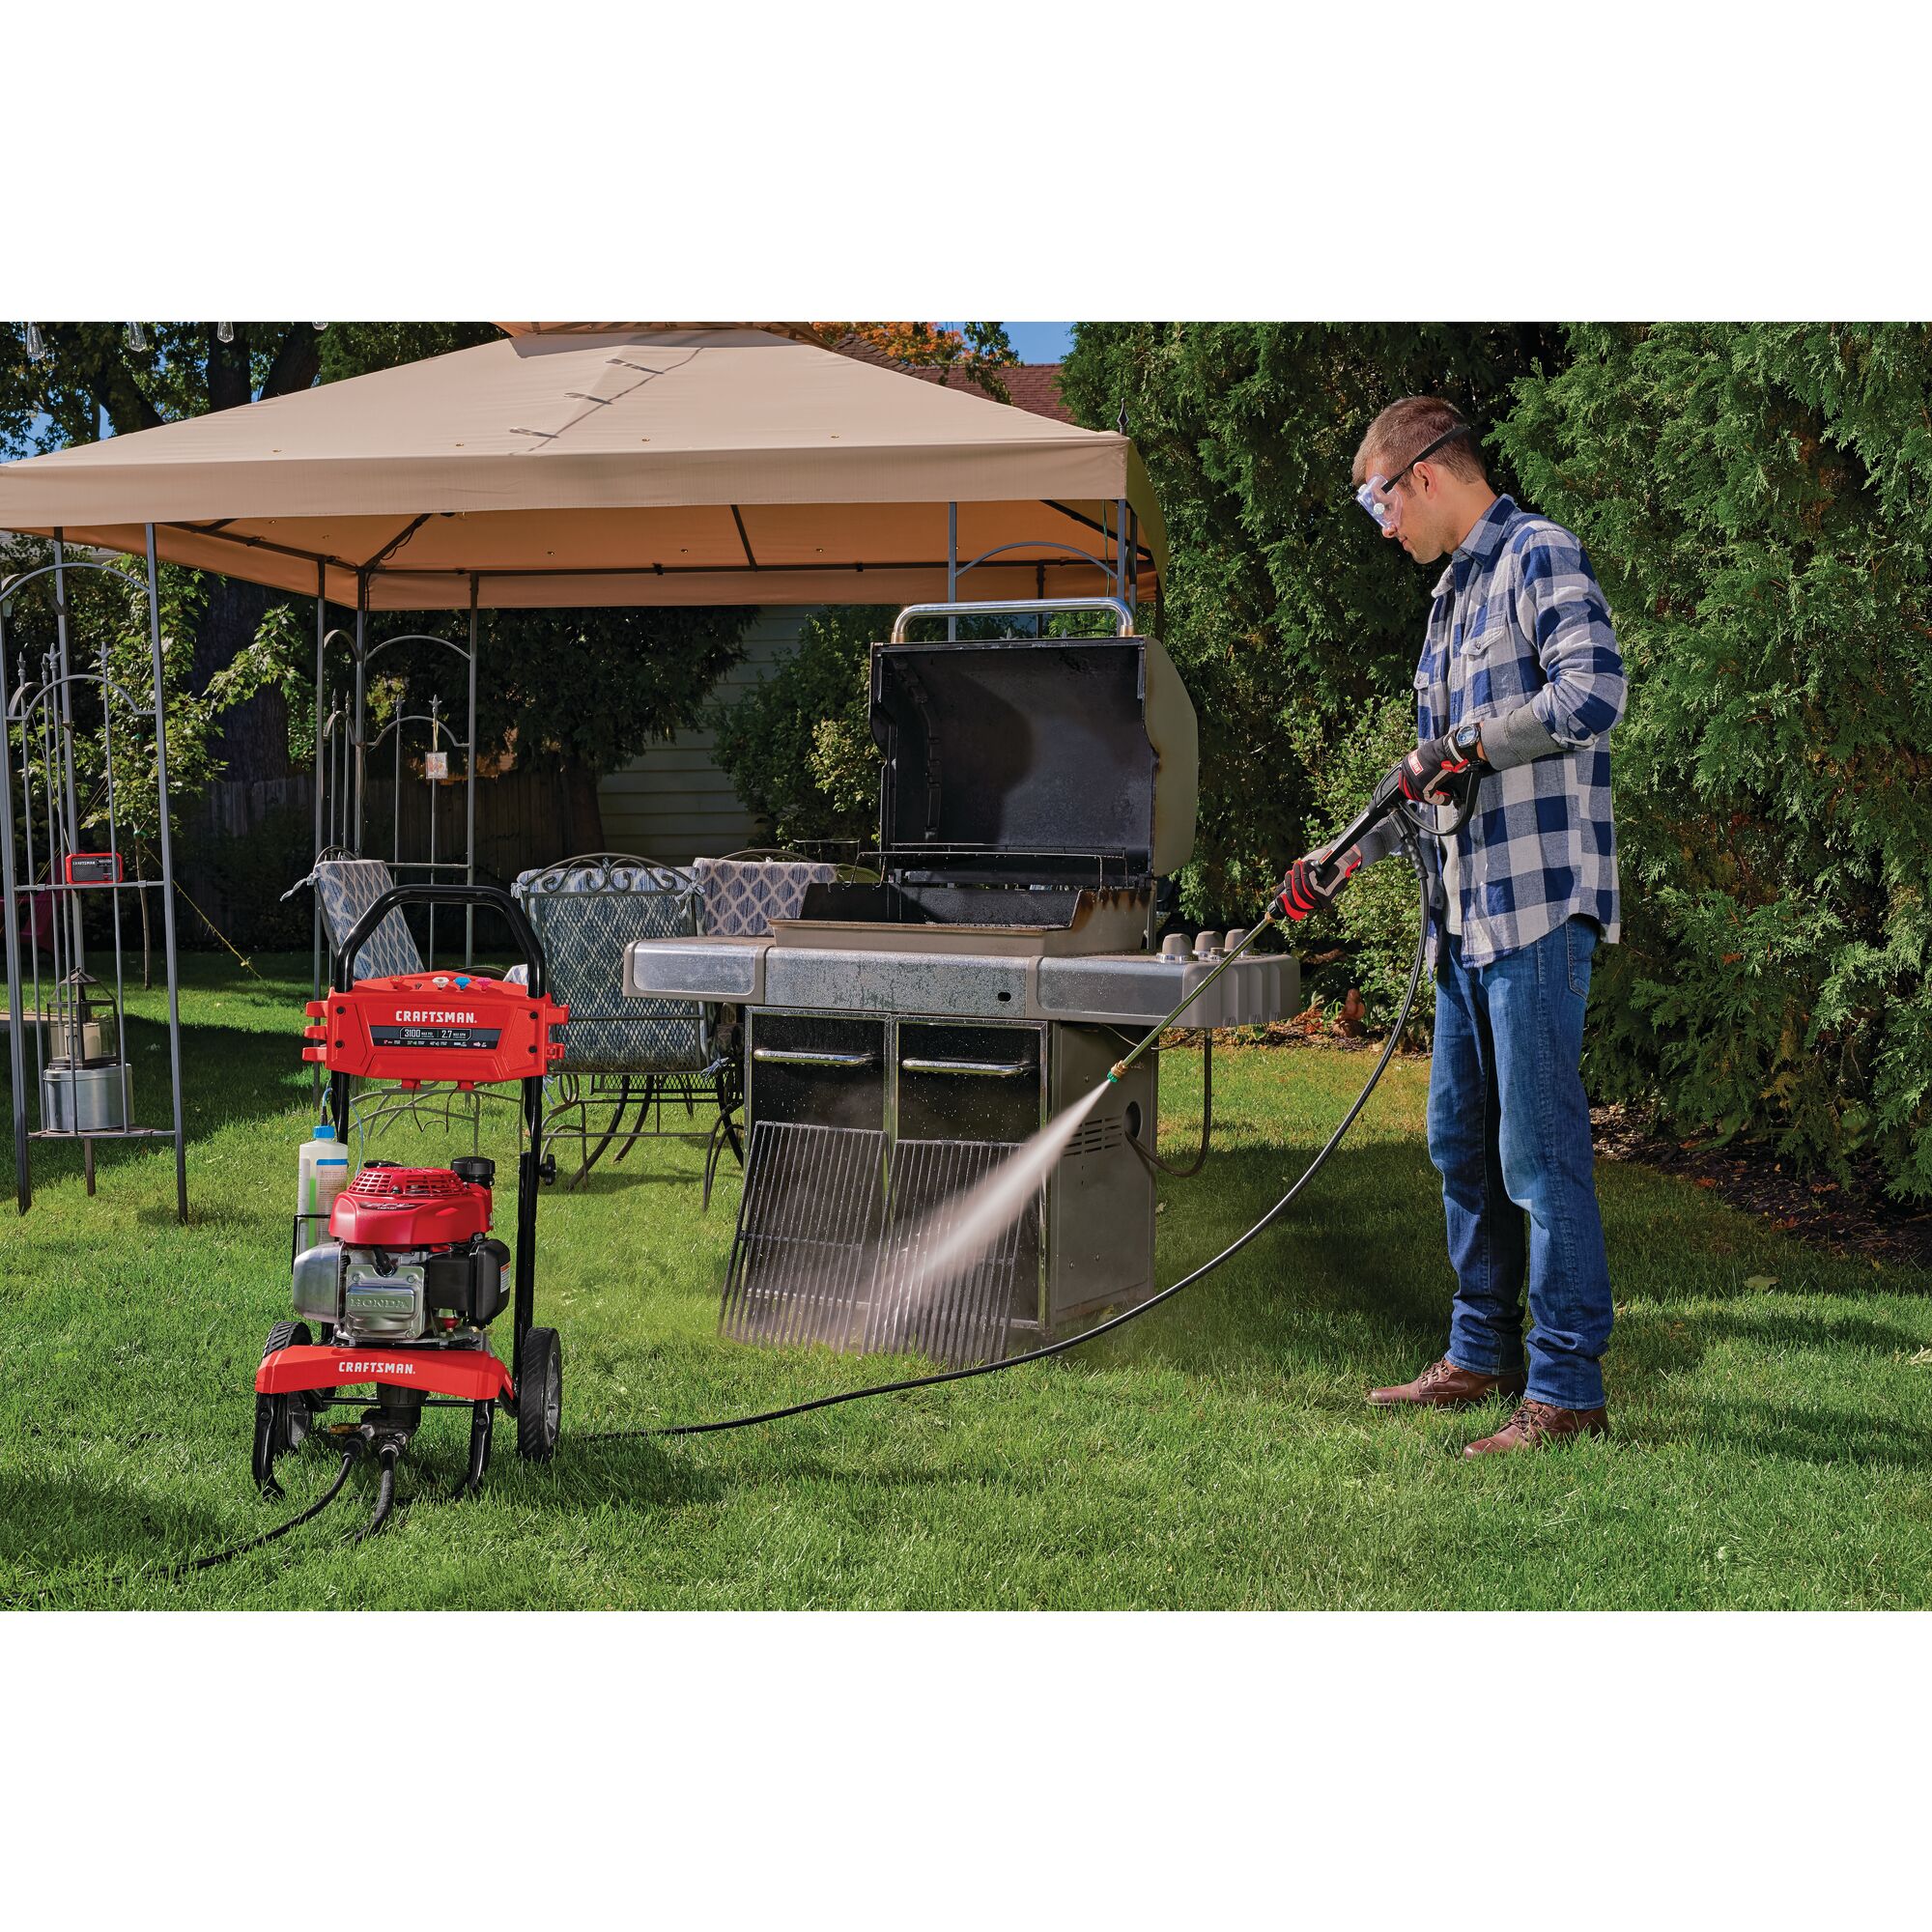 3100 MAX Pounds per Square Inch or 2 and seven tenths MAX Gallons Per Minute Pressure Washer being used by person to wash Bar B Que grills placed outdoors in lawn.